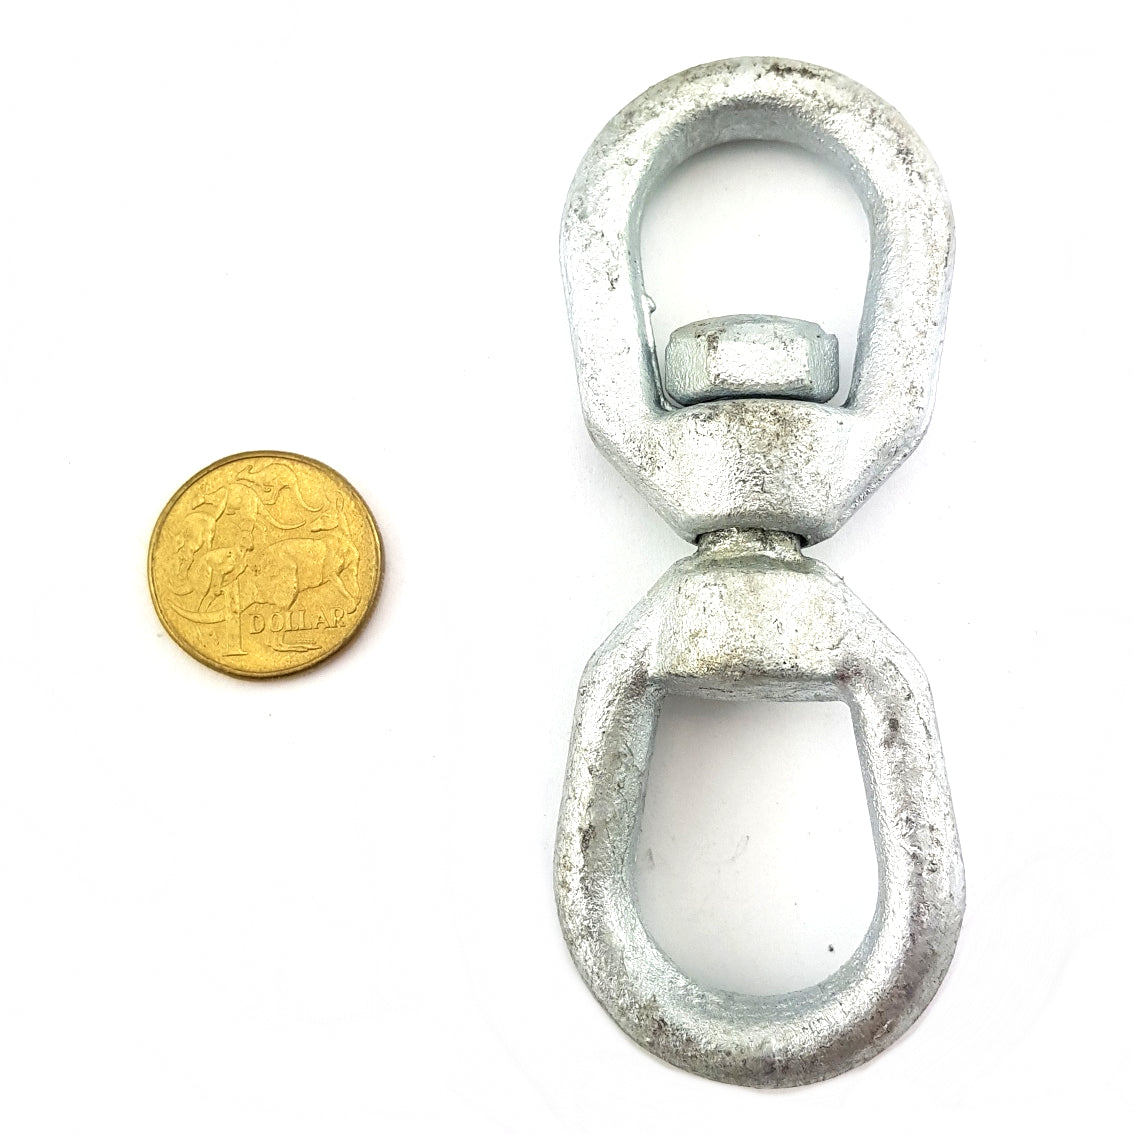 Galvanised steel chain swivel, size 8mm. Melbourne and Australia wide.